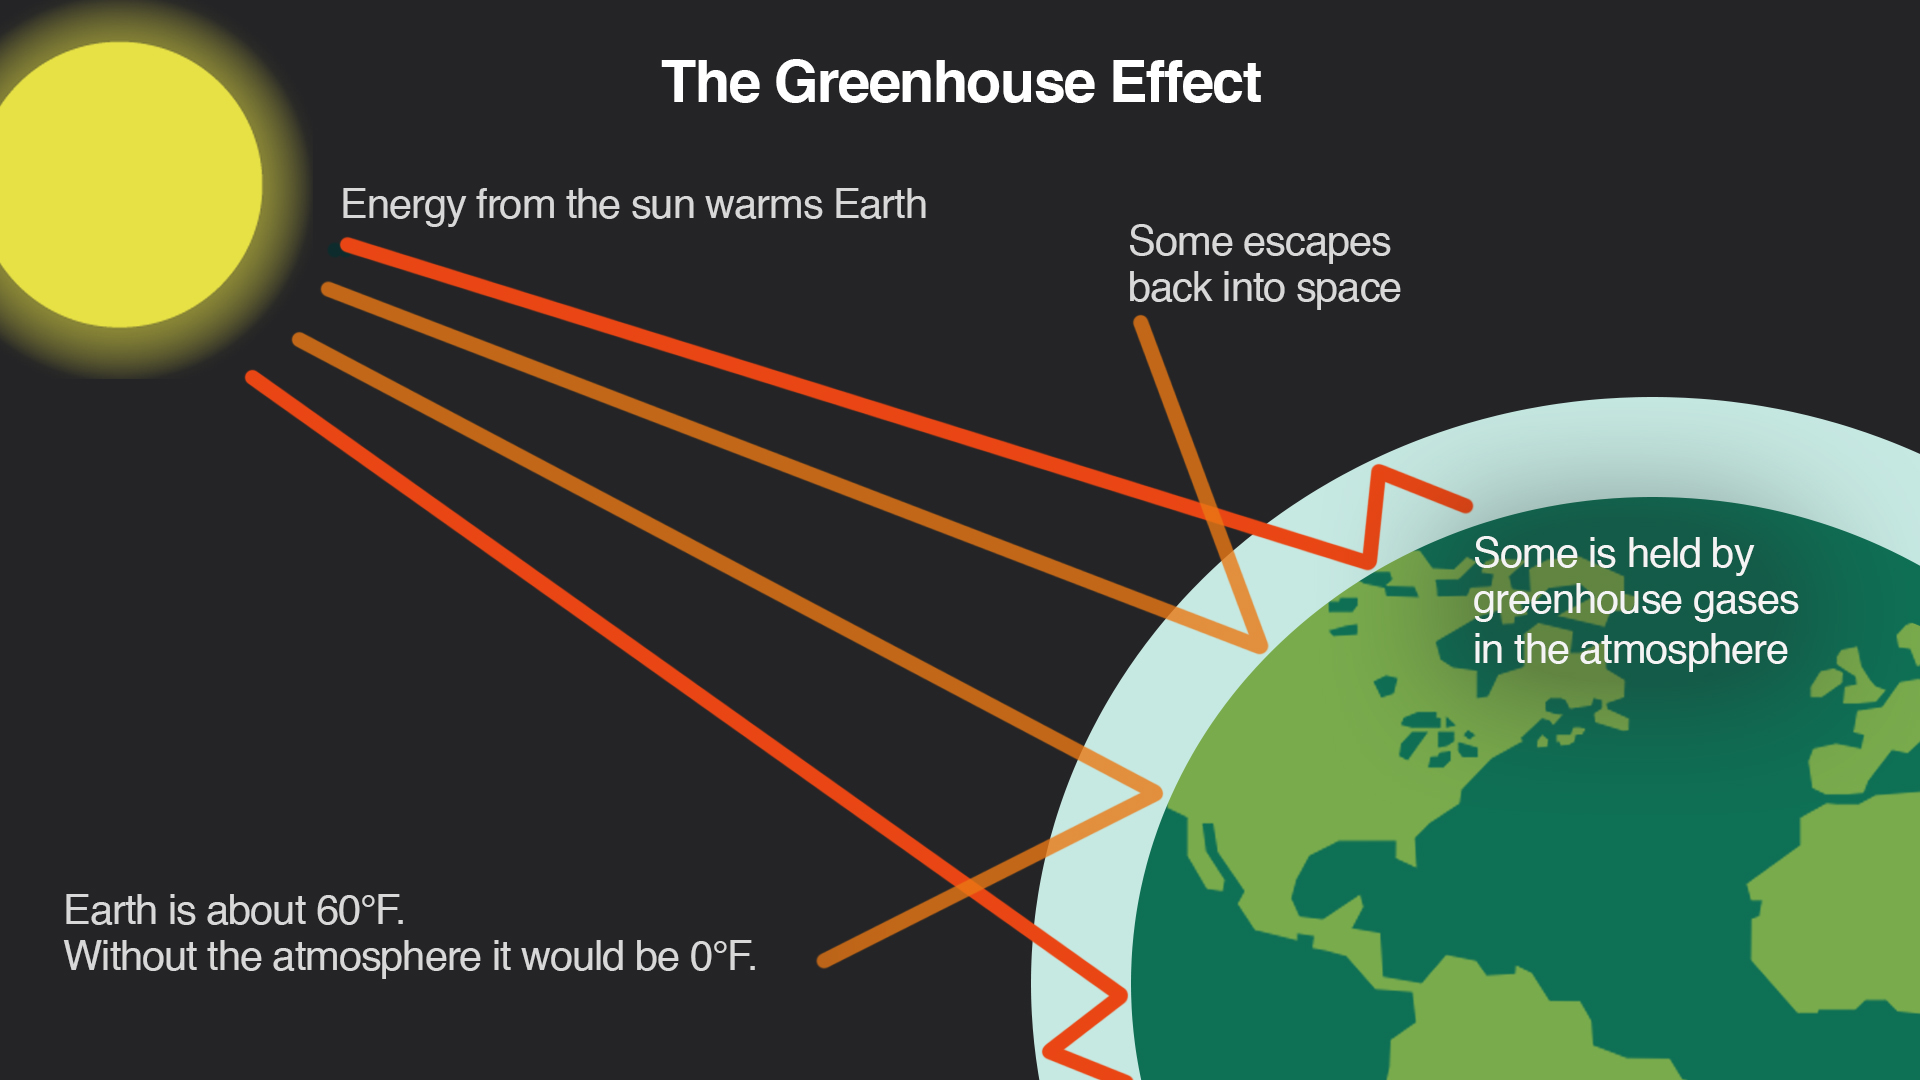 essay on greenhouse effect 200 words